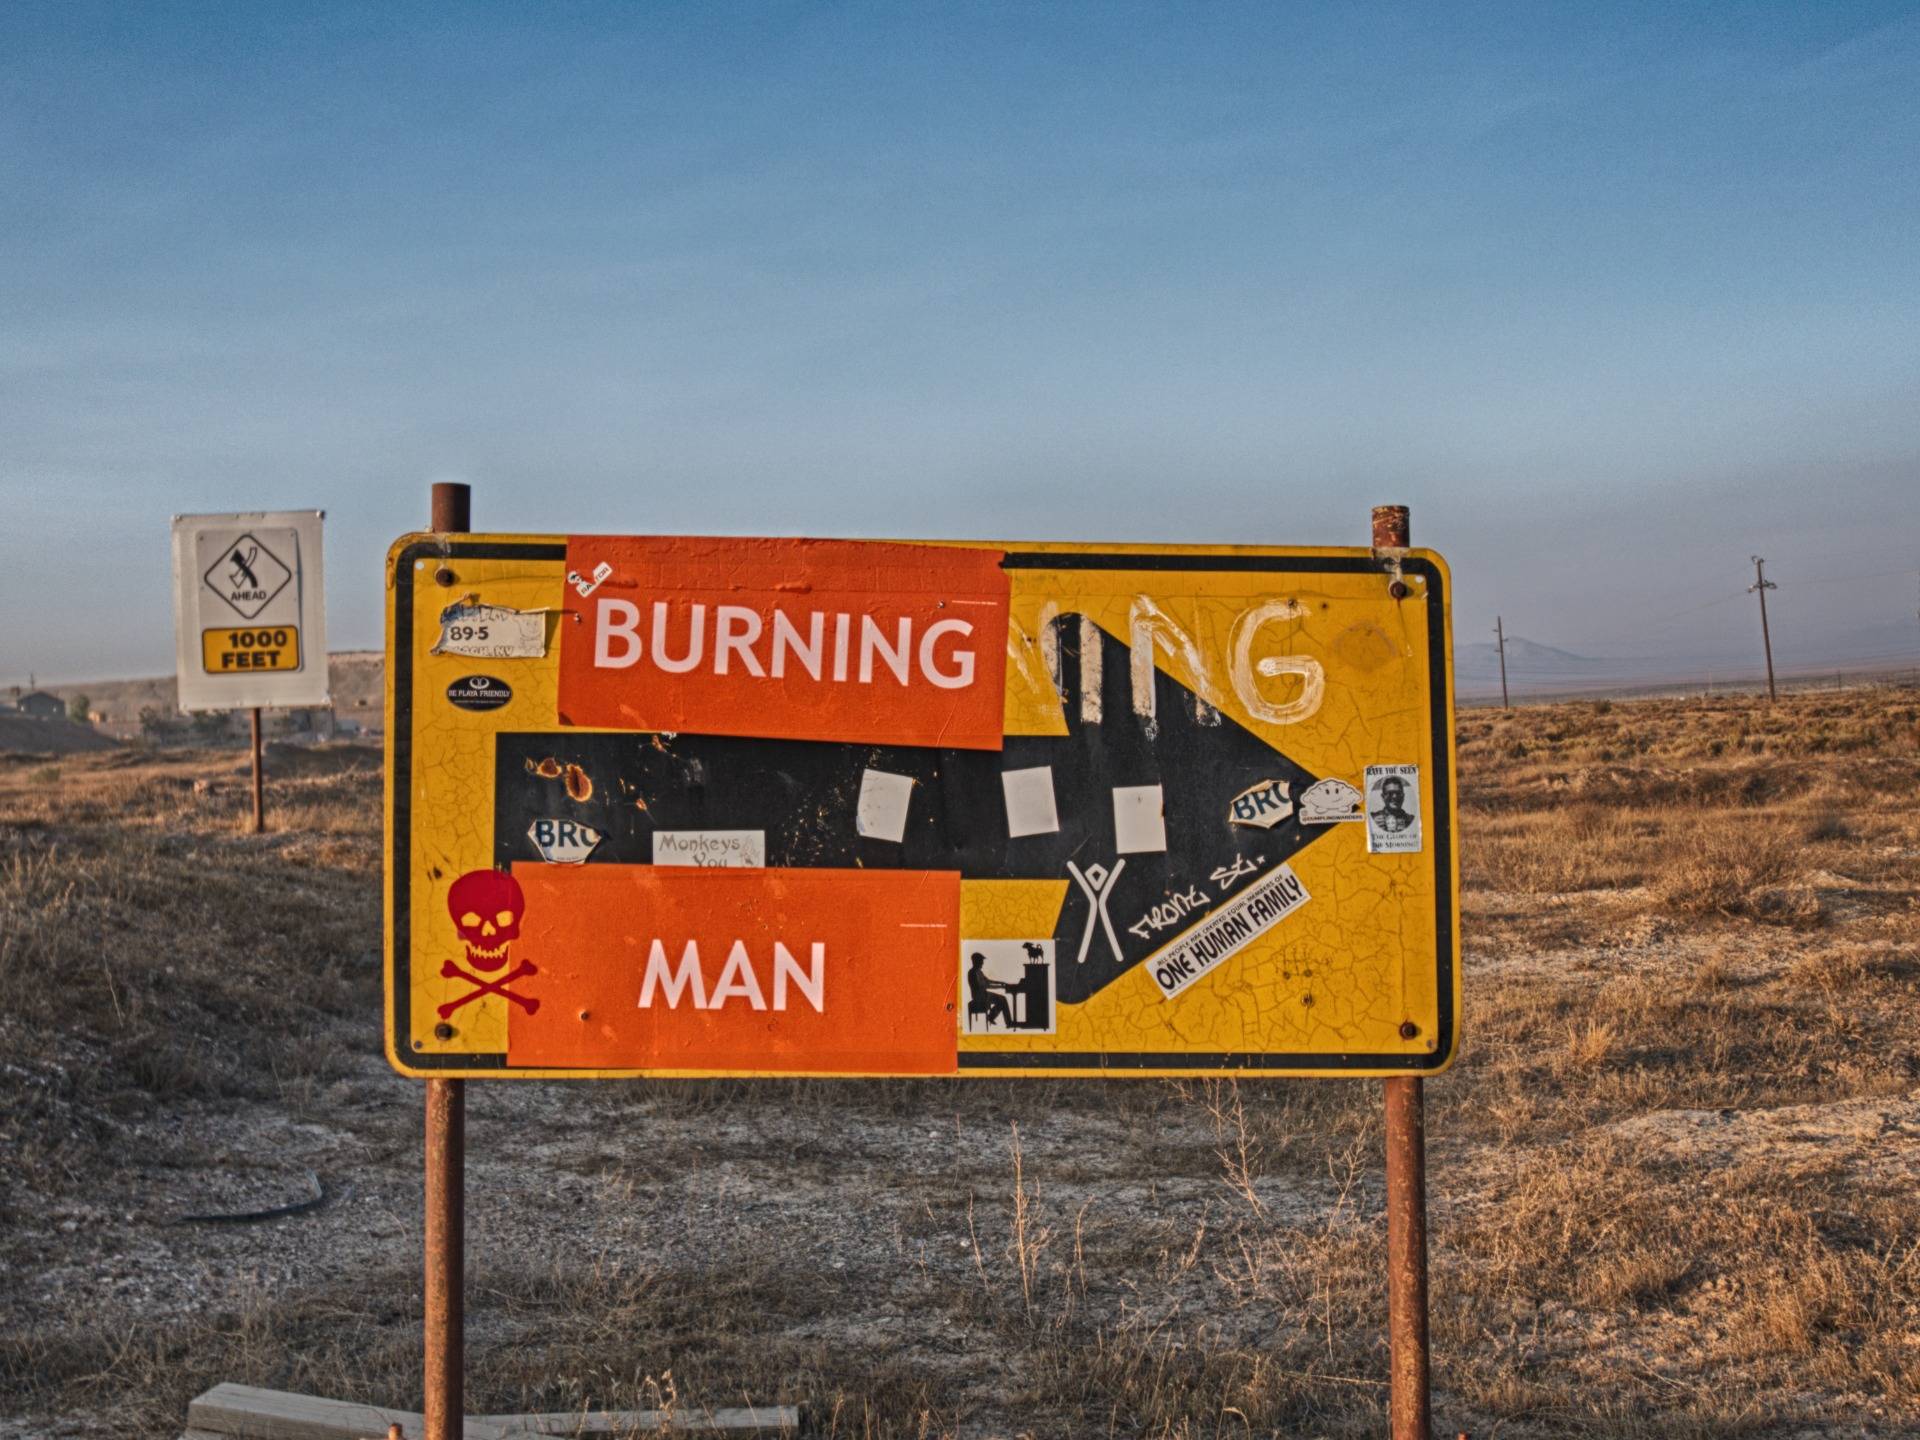 The ”unofficial” Burning Man sign. This sign has been here for years.